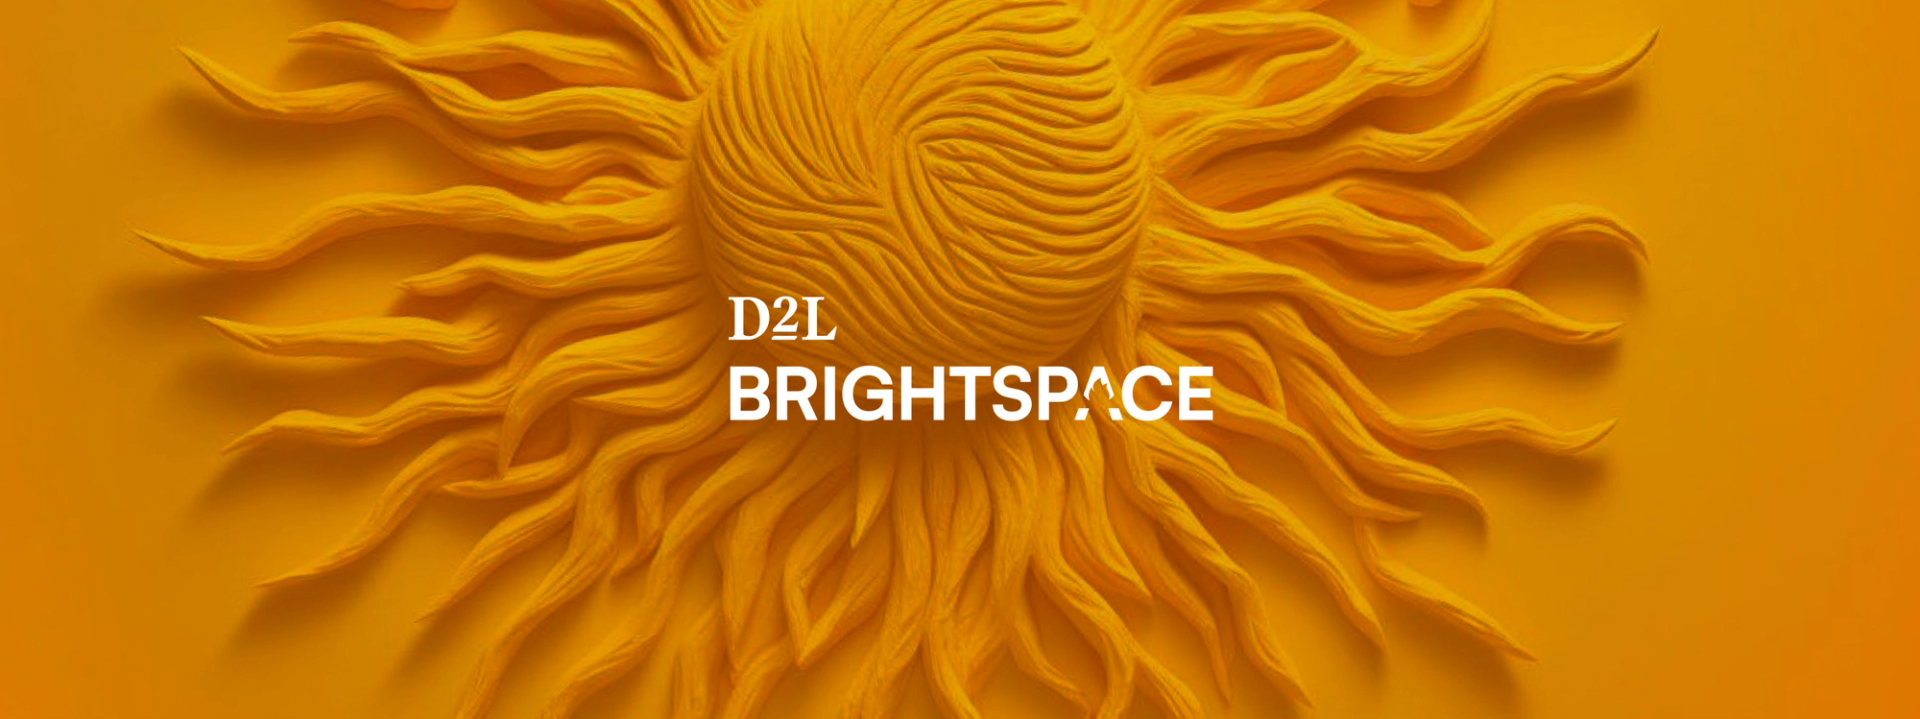 D2L Brightspace's Innovative AI-Powered Ad Campaign Redefines EdTech Marketing